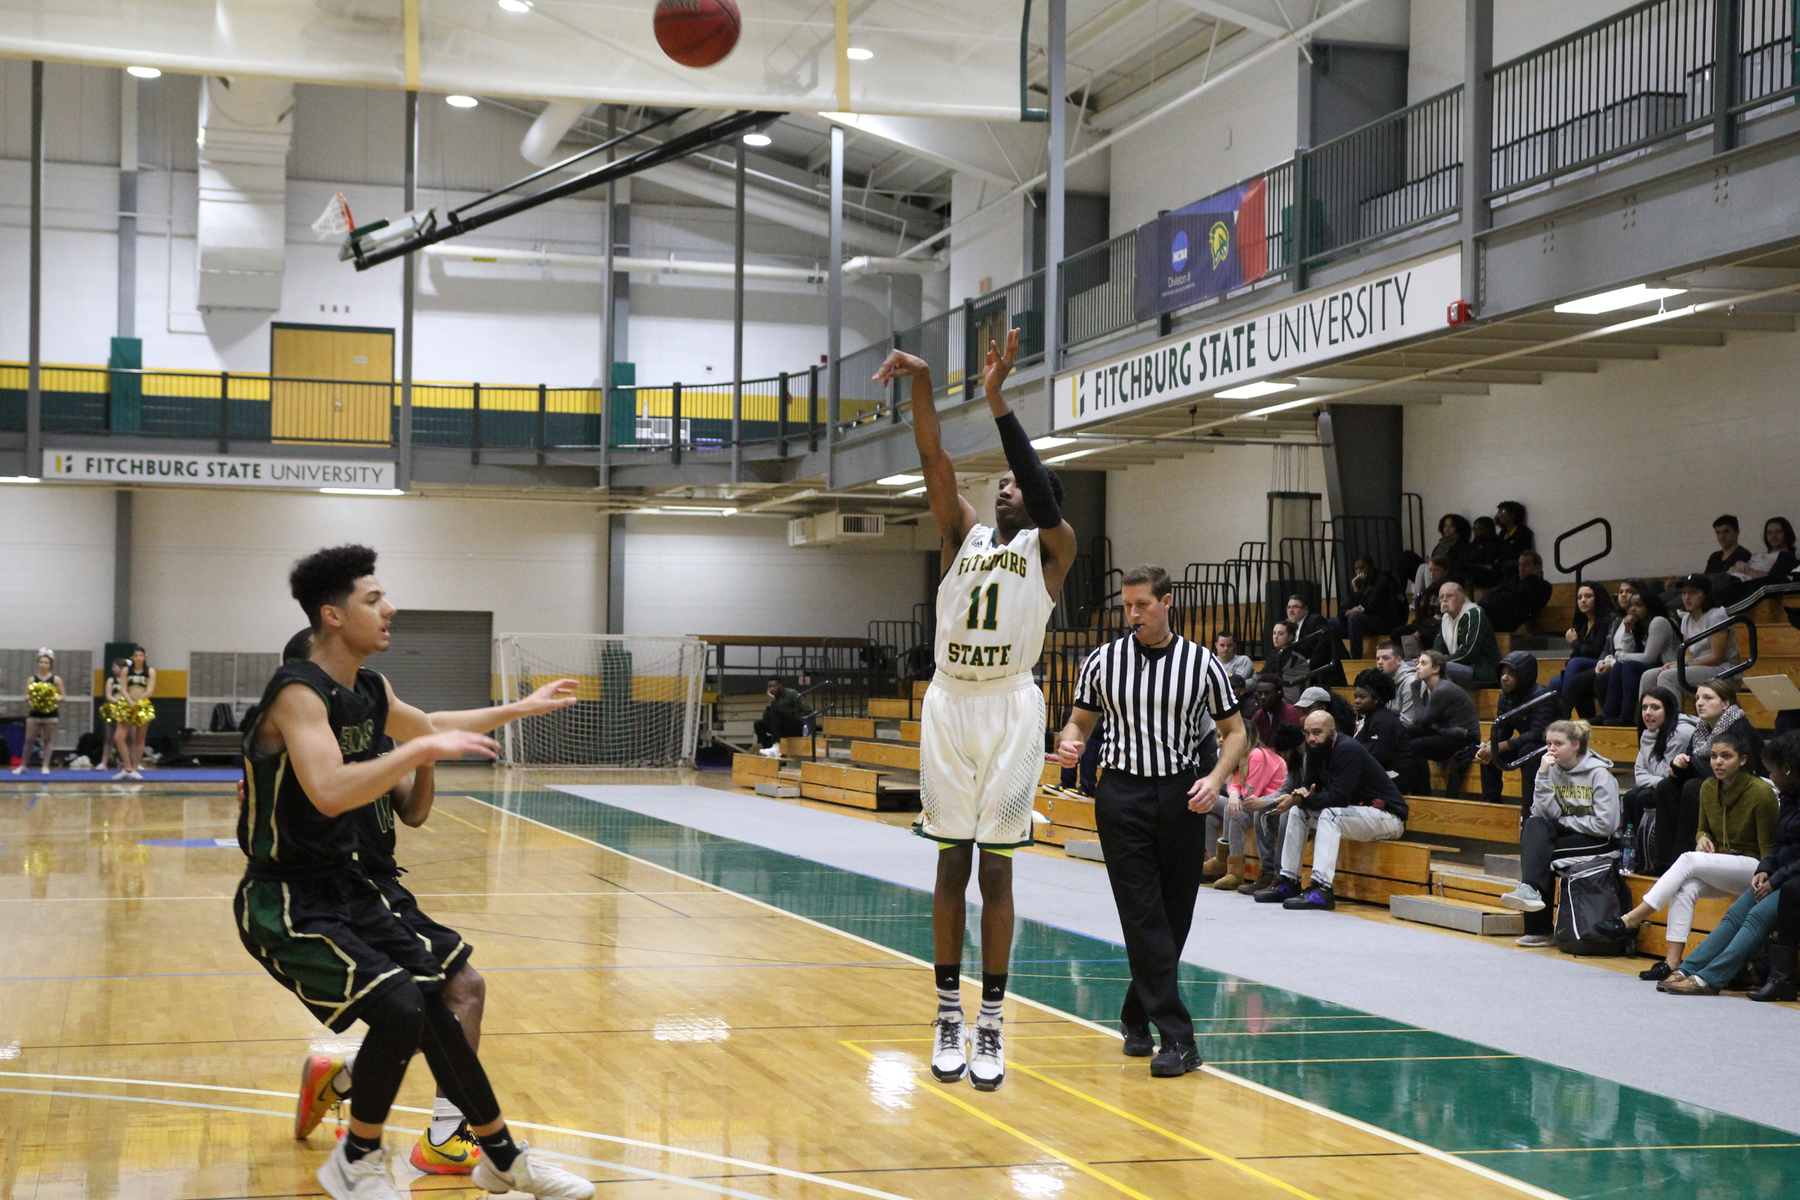 Fitchburg State Nipped By Bridgewater State, 83-77